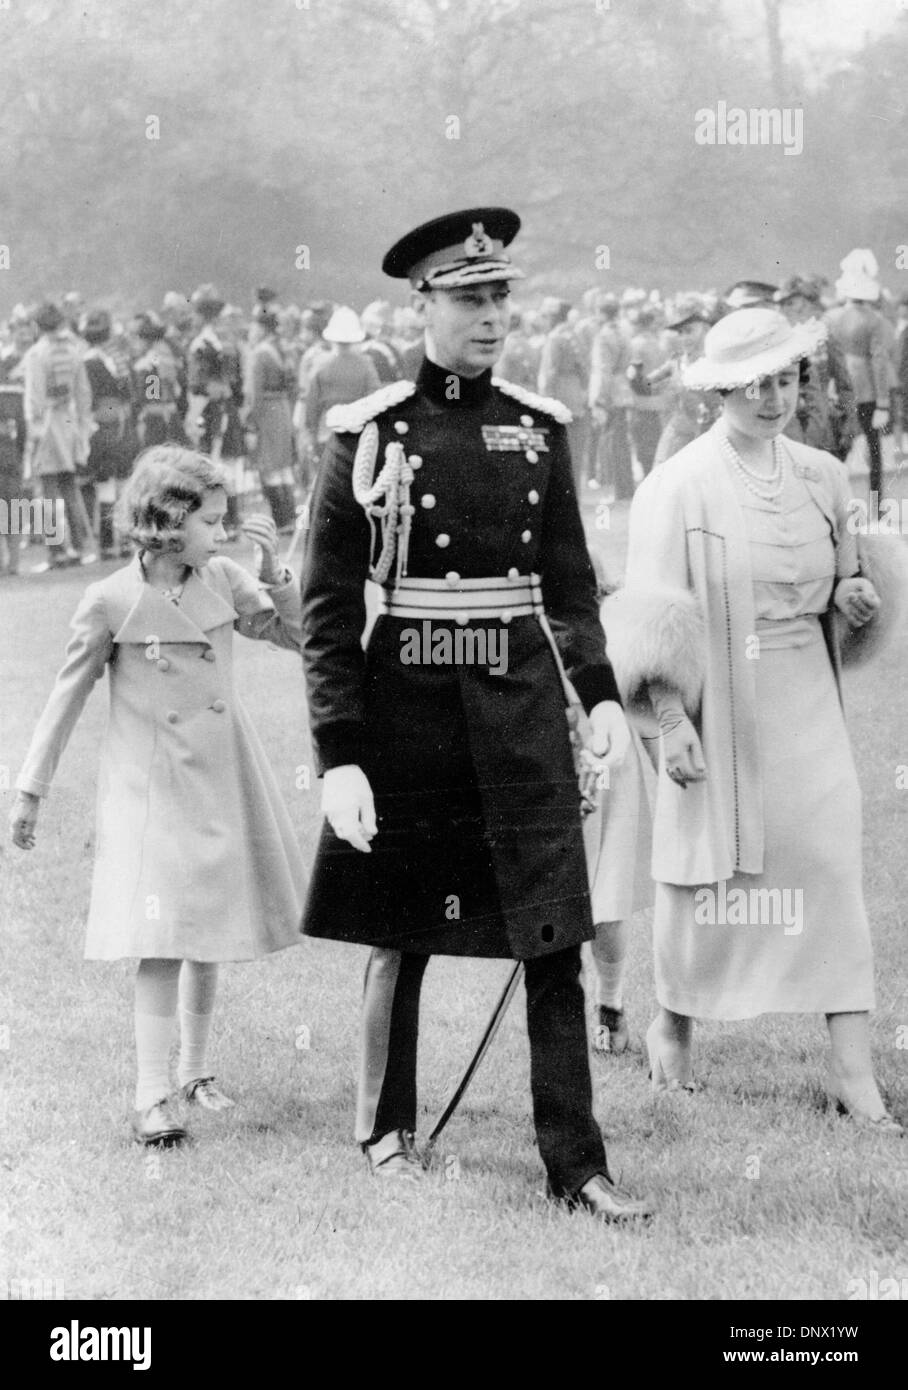 May 14, 1937 - London, England, U.K. - GEORGE VI Became King unexpectedly following the abdication of his brother, King Edward VIII, in 1936. AÊconscientious and dedicated man, he worked hard to adapt to the role into which he was suddenly thrown. He had married Lady ELIZABETH BOWES-LYON in 1923. King George VI paid State Visits to France in 1938, and to Canada and the United State Stock Photo